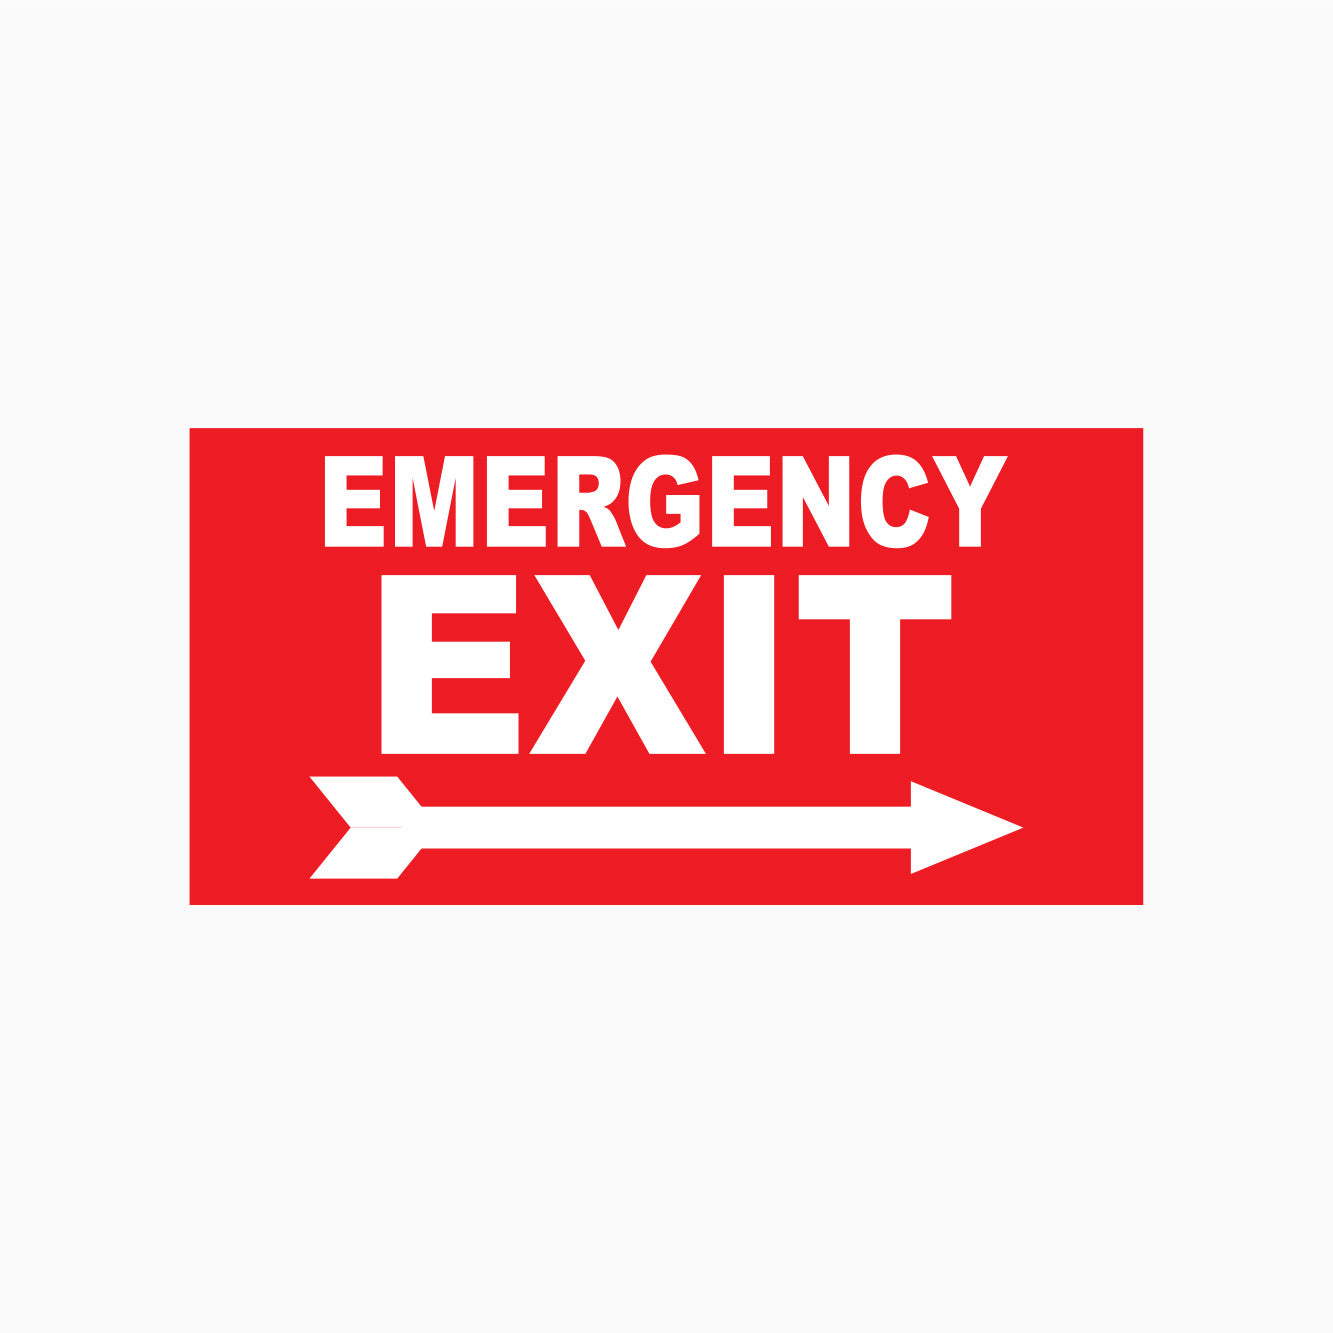 EMERGENCY EXIT SIGN - RIGHT ARROW